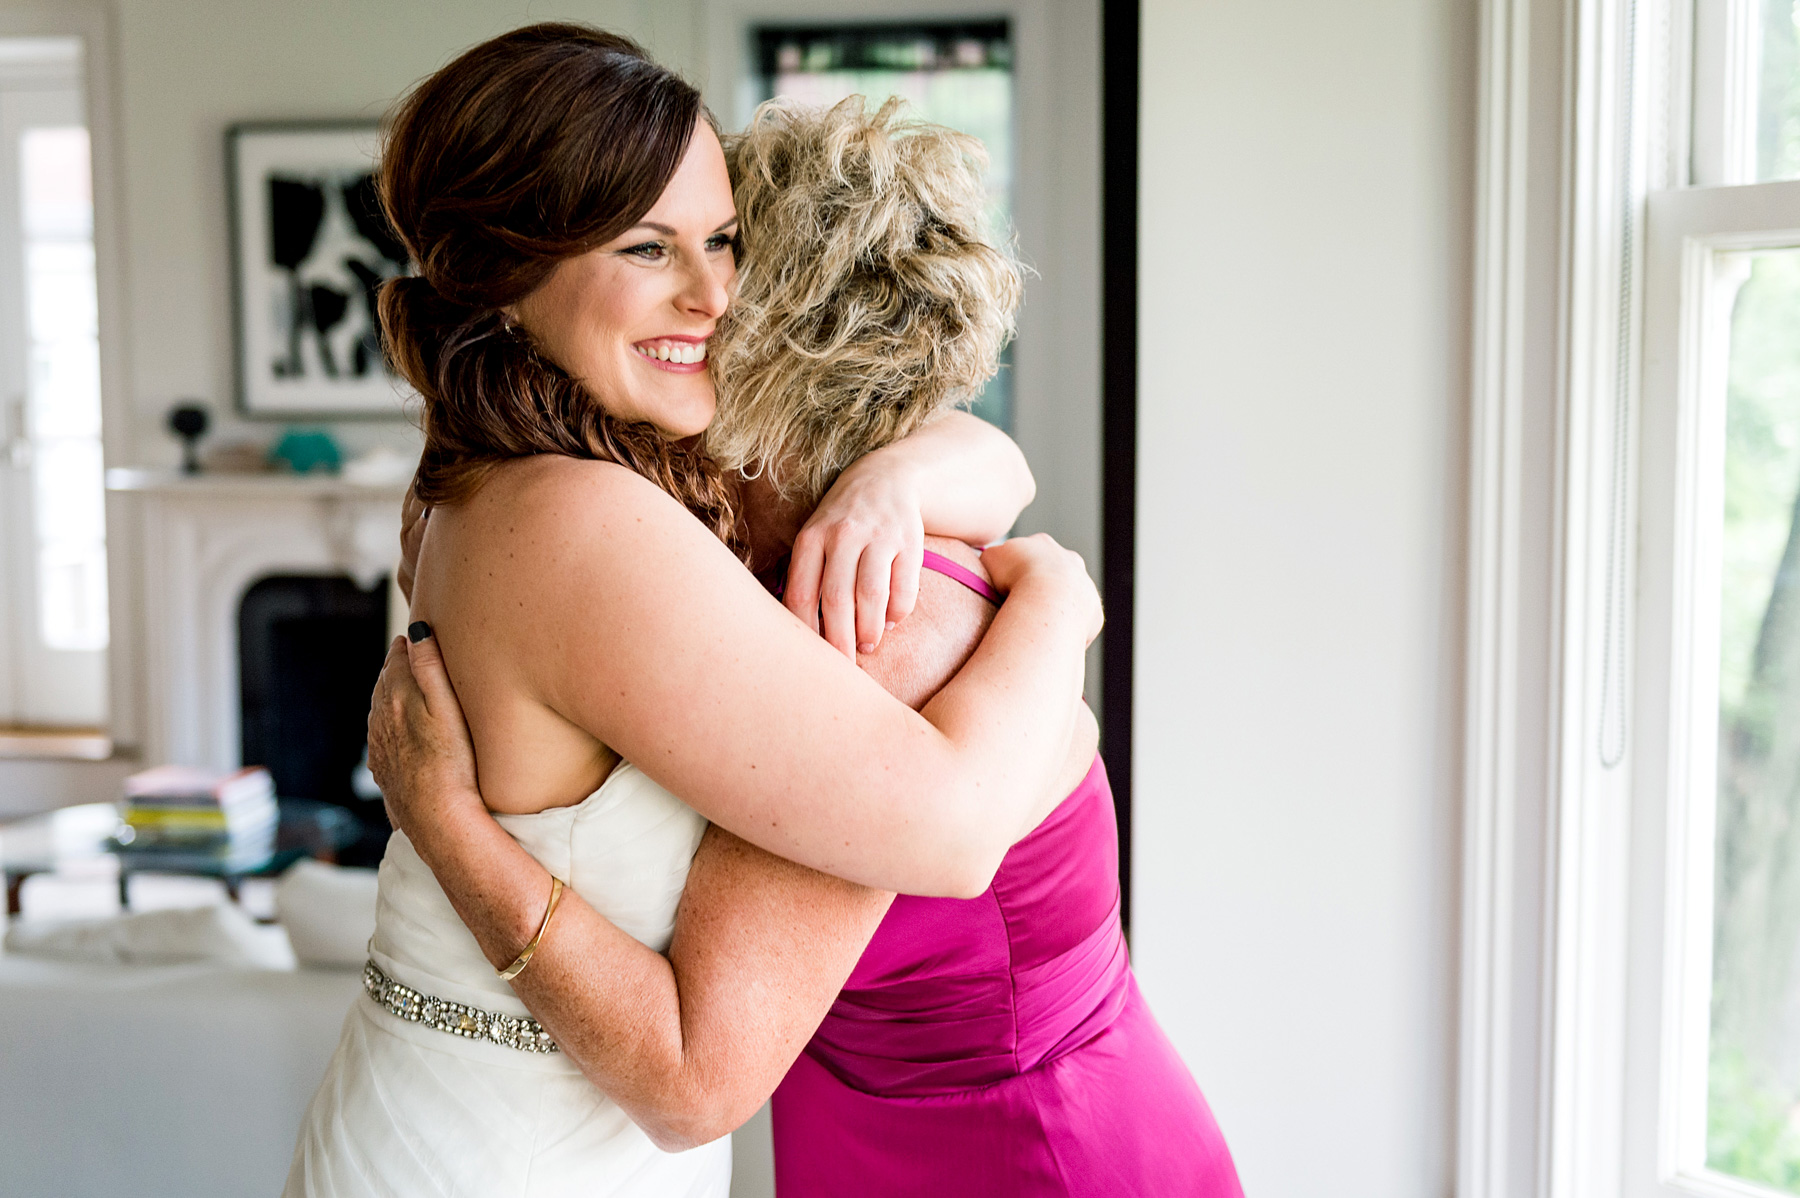 photo of bride getting ready by ashley fisher photography